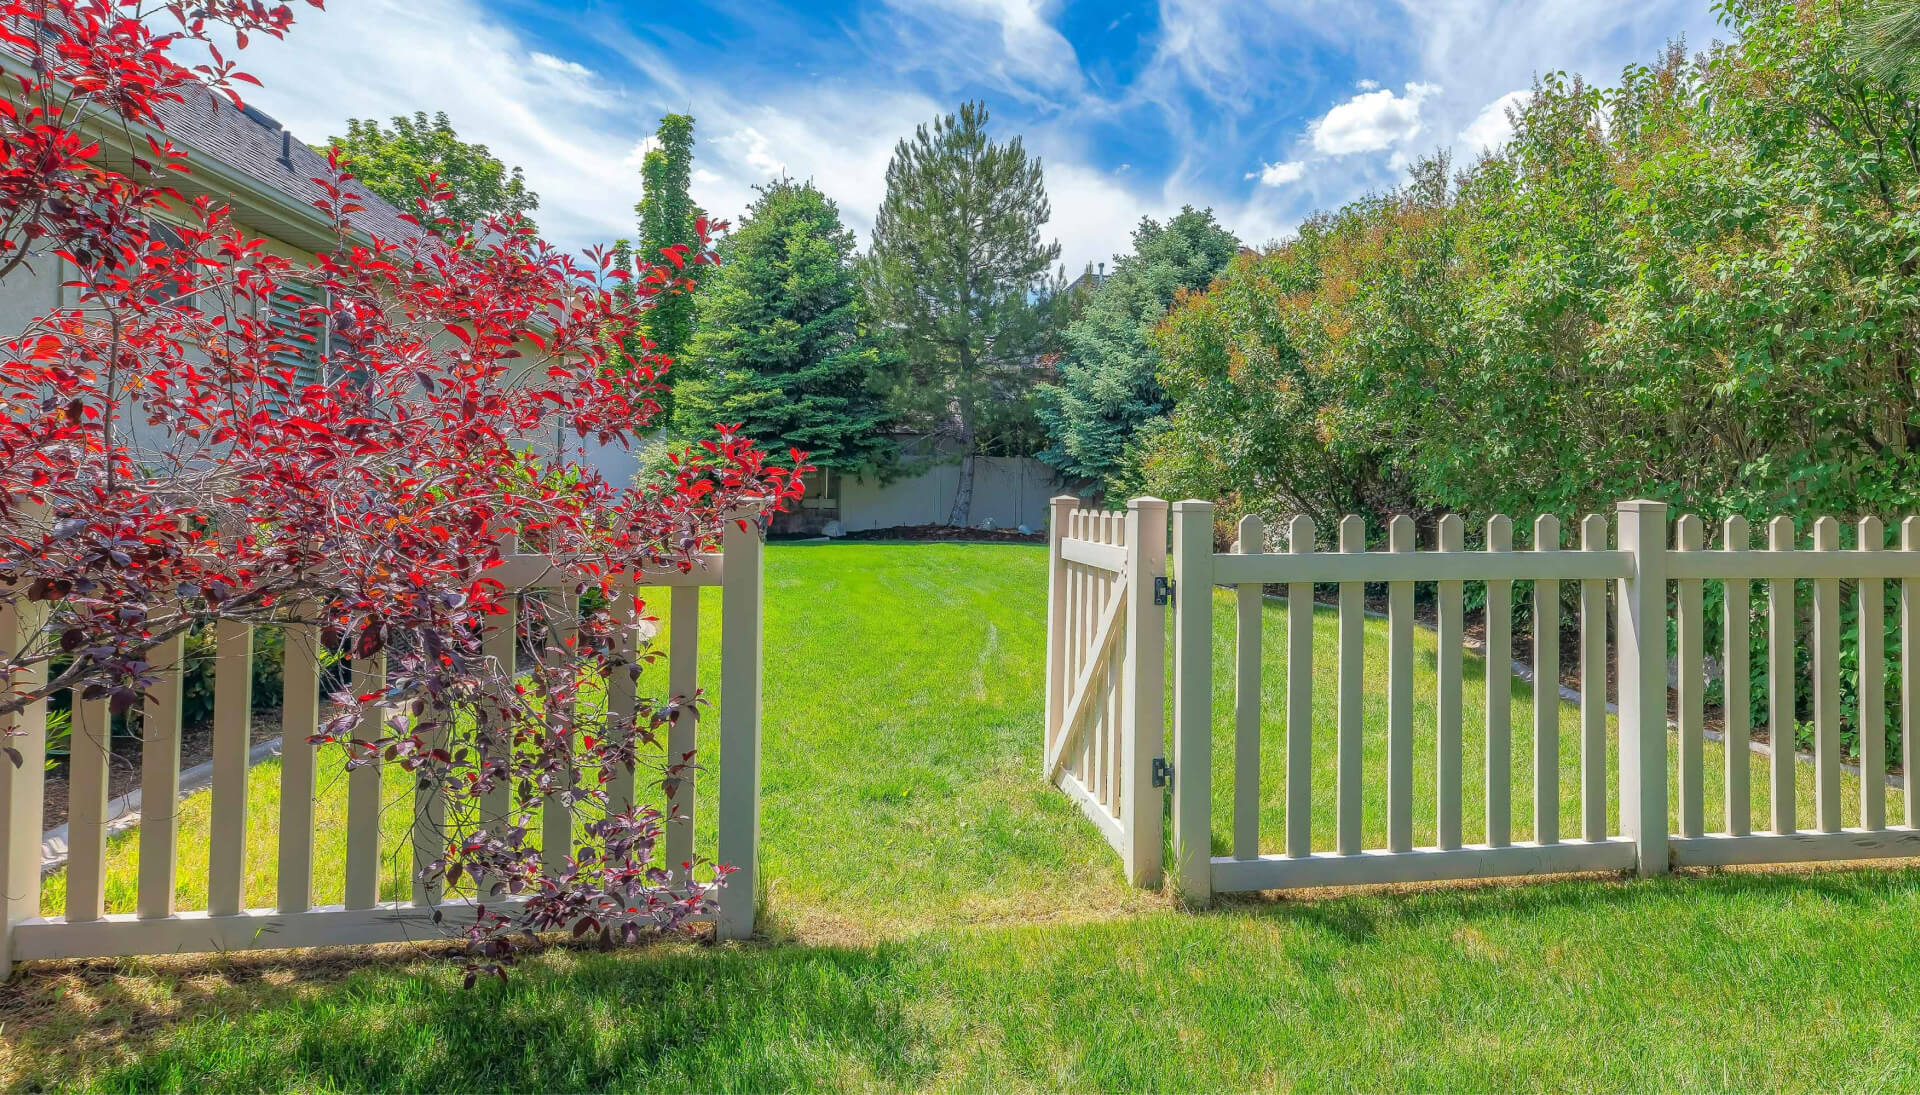 Fence gate installation services in Fayetteville